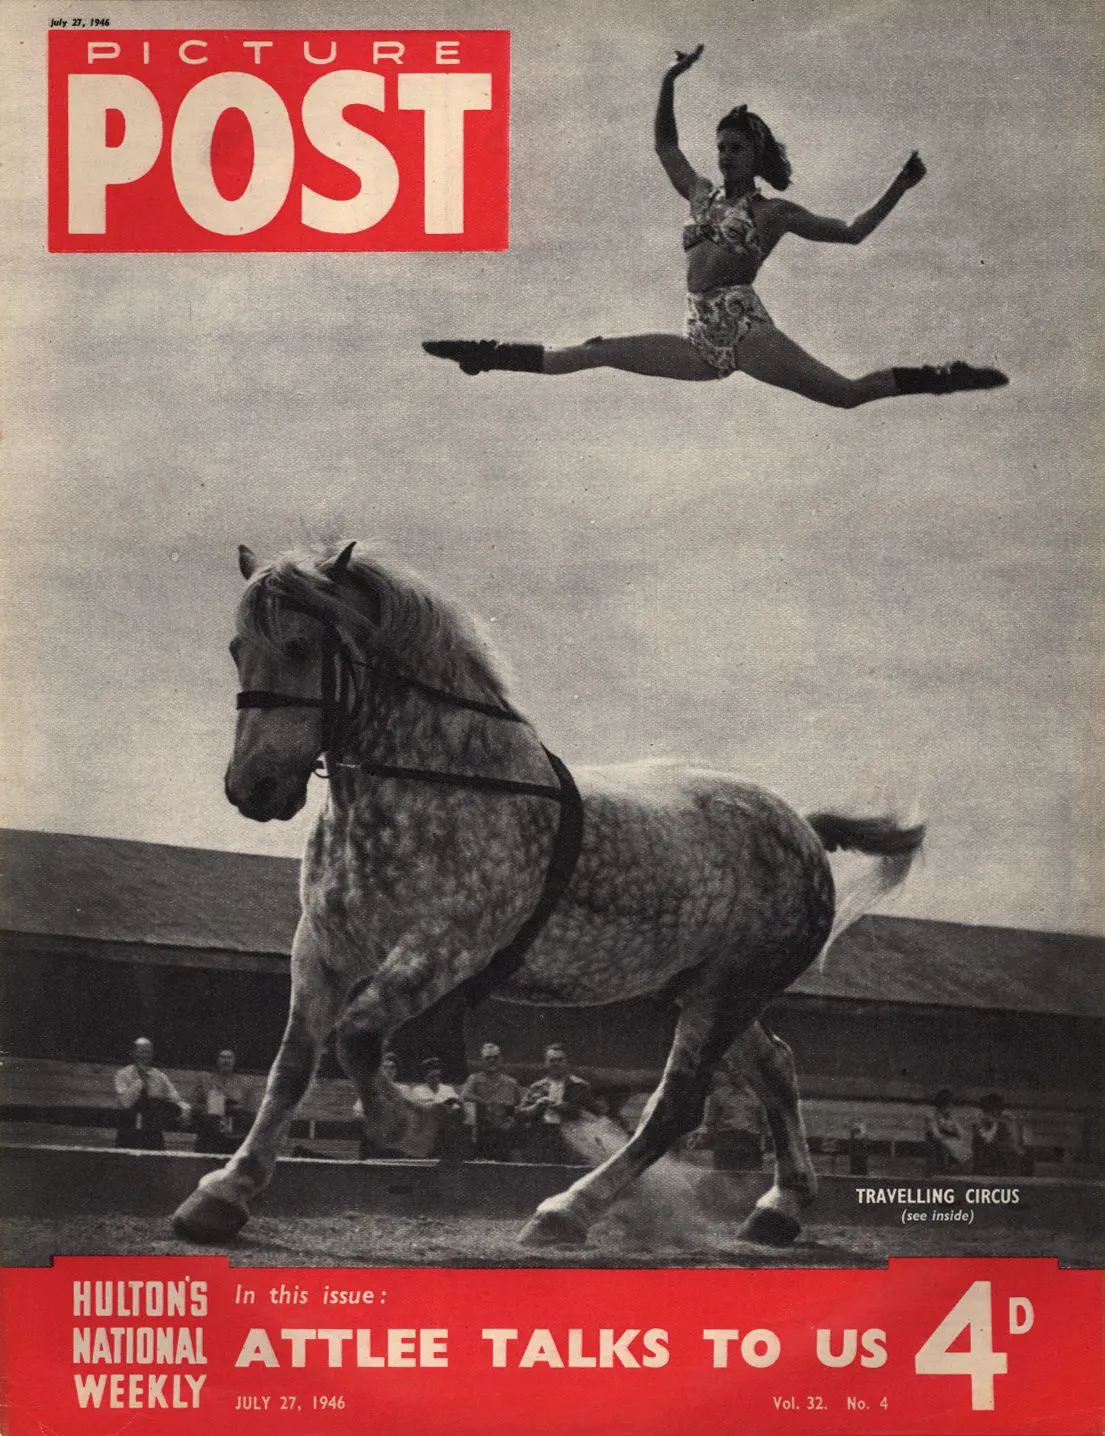 27th July 1946: A performer from the Chipperfield Circus leaps high into the air from the back of a horse, during the troupe's short stay in Little Wadebridge. The headline beneath reads 'Attlee Talks To Us'. Original Publication: Picture Post Cover - 4144 - The Circus Comes To Town - pub. 1946 (Photo by IPC Magazines/Picture Post/Getty Images)